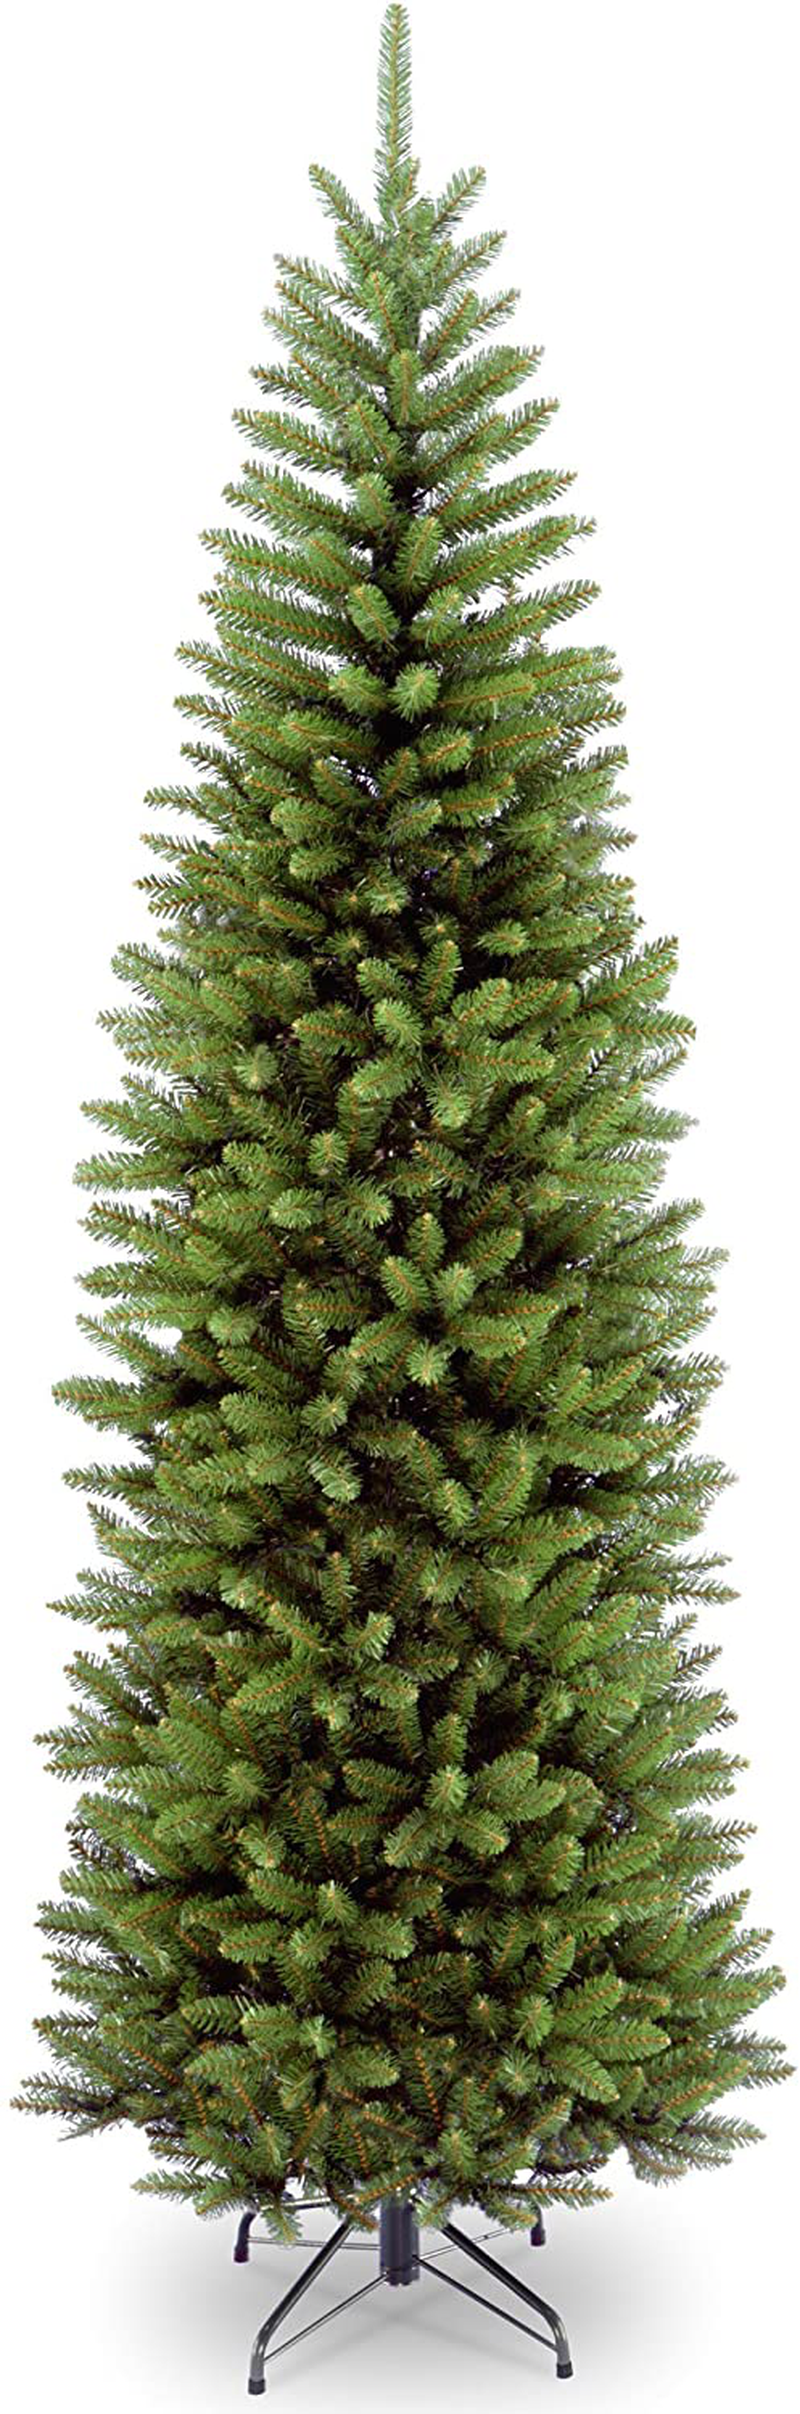 National Tree Company Artificial Christmas Tree Includes Stand, Kingswood Fir Slim - 7 ft, Green Home & Garden > Decor > Seasonal & Holiday Decorations > Christmas Tree Stands National Tree Kingswood Fir Slim - 7 ft  